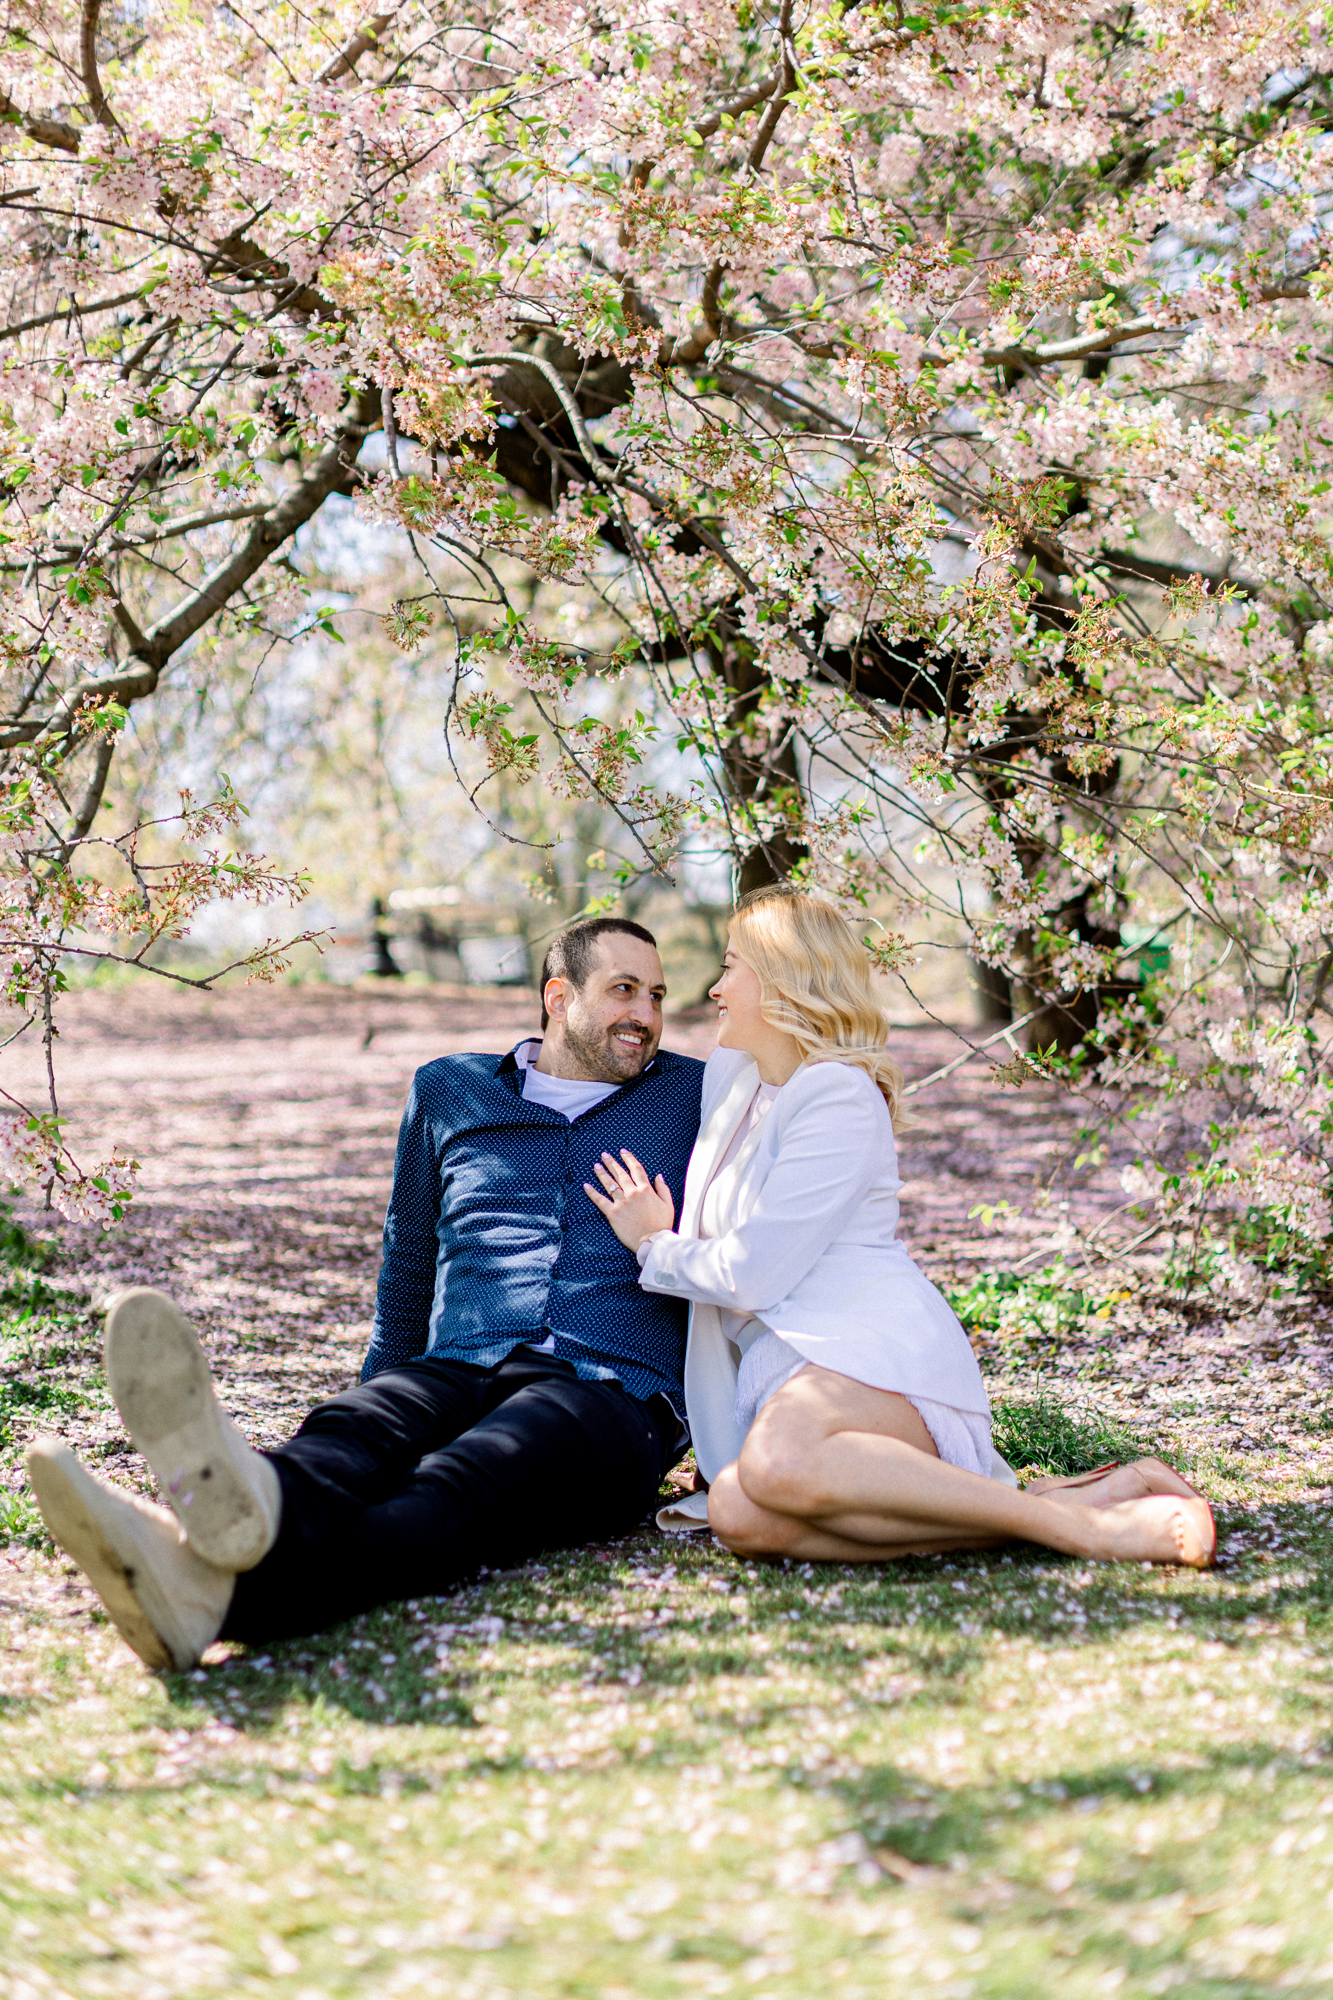 Bright NYC Engagement Photography with Spring Blossoms